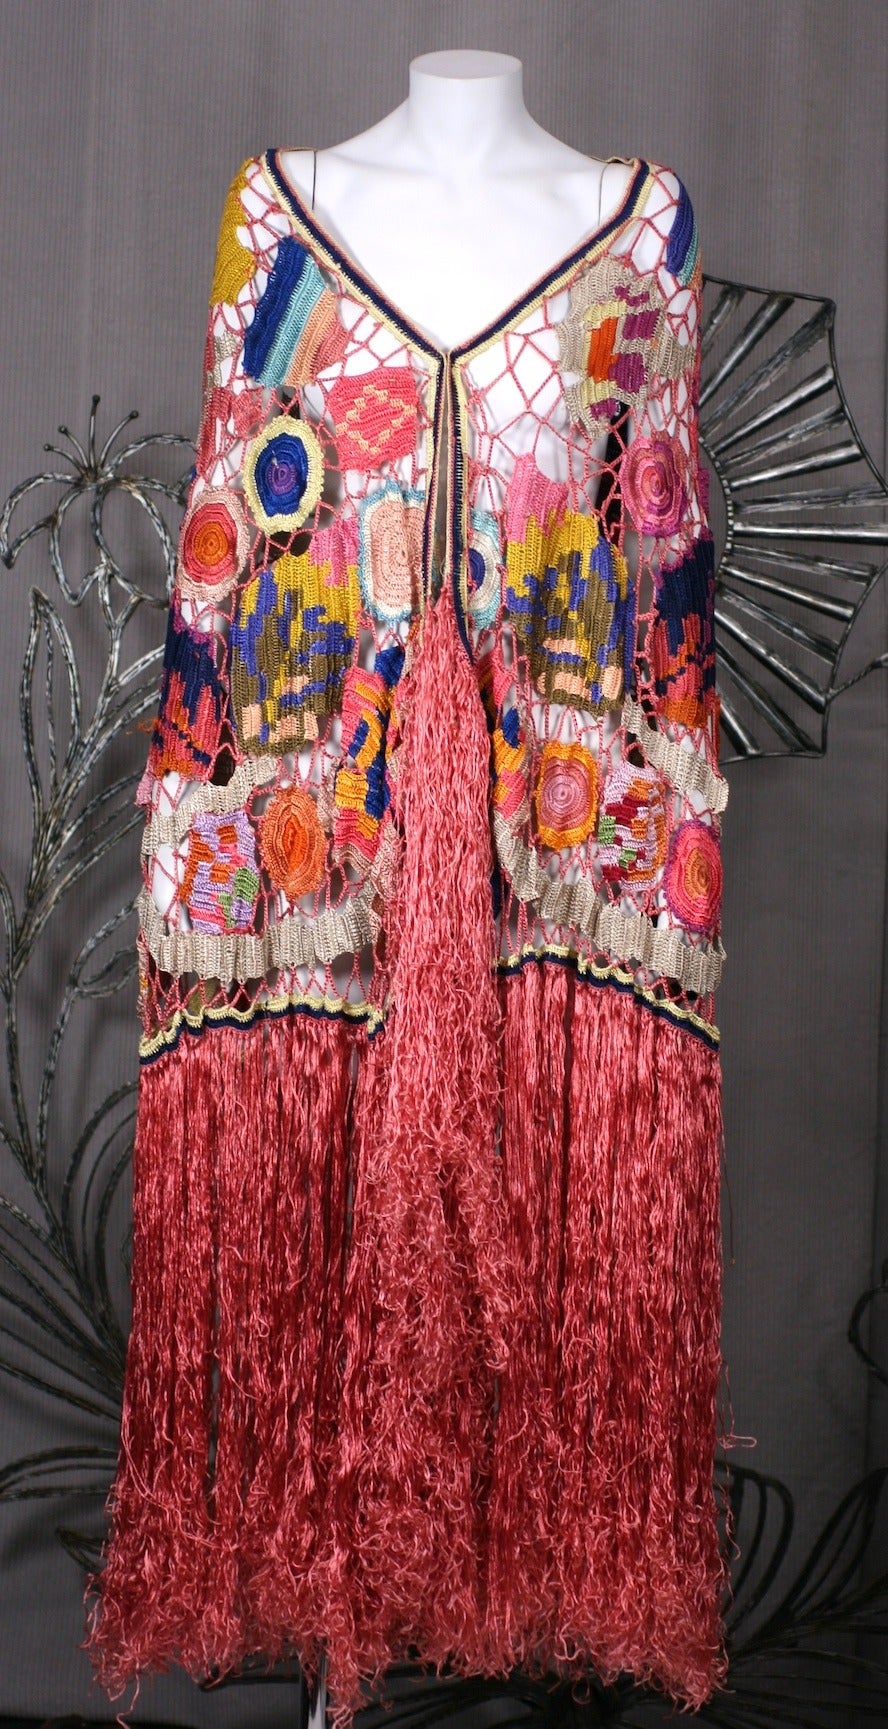 Amazing Austrian Secessionist Hand Crochet Shawl in the most extraordinarily vibrant tones of rayon yarn. Figural motifs such as abstracted flowers, leaves and birds (parrots) are found all over this hand made shawl from the period of the Weiner